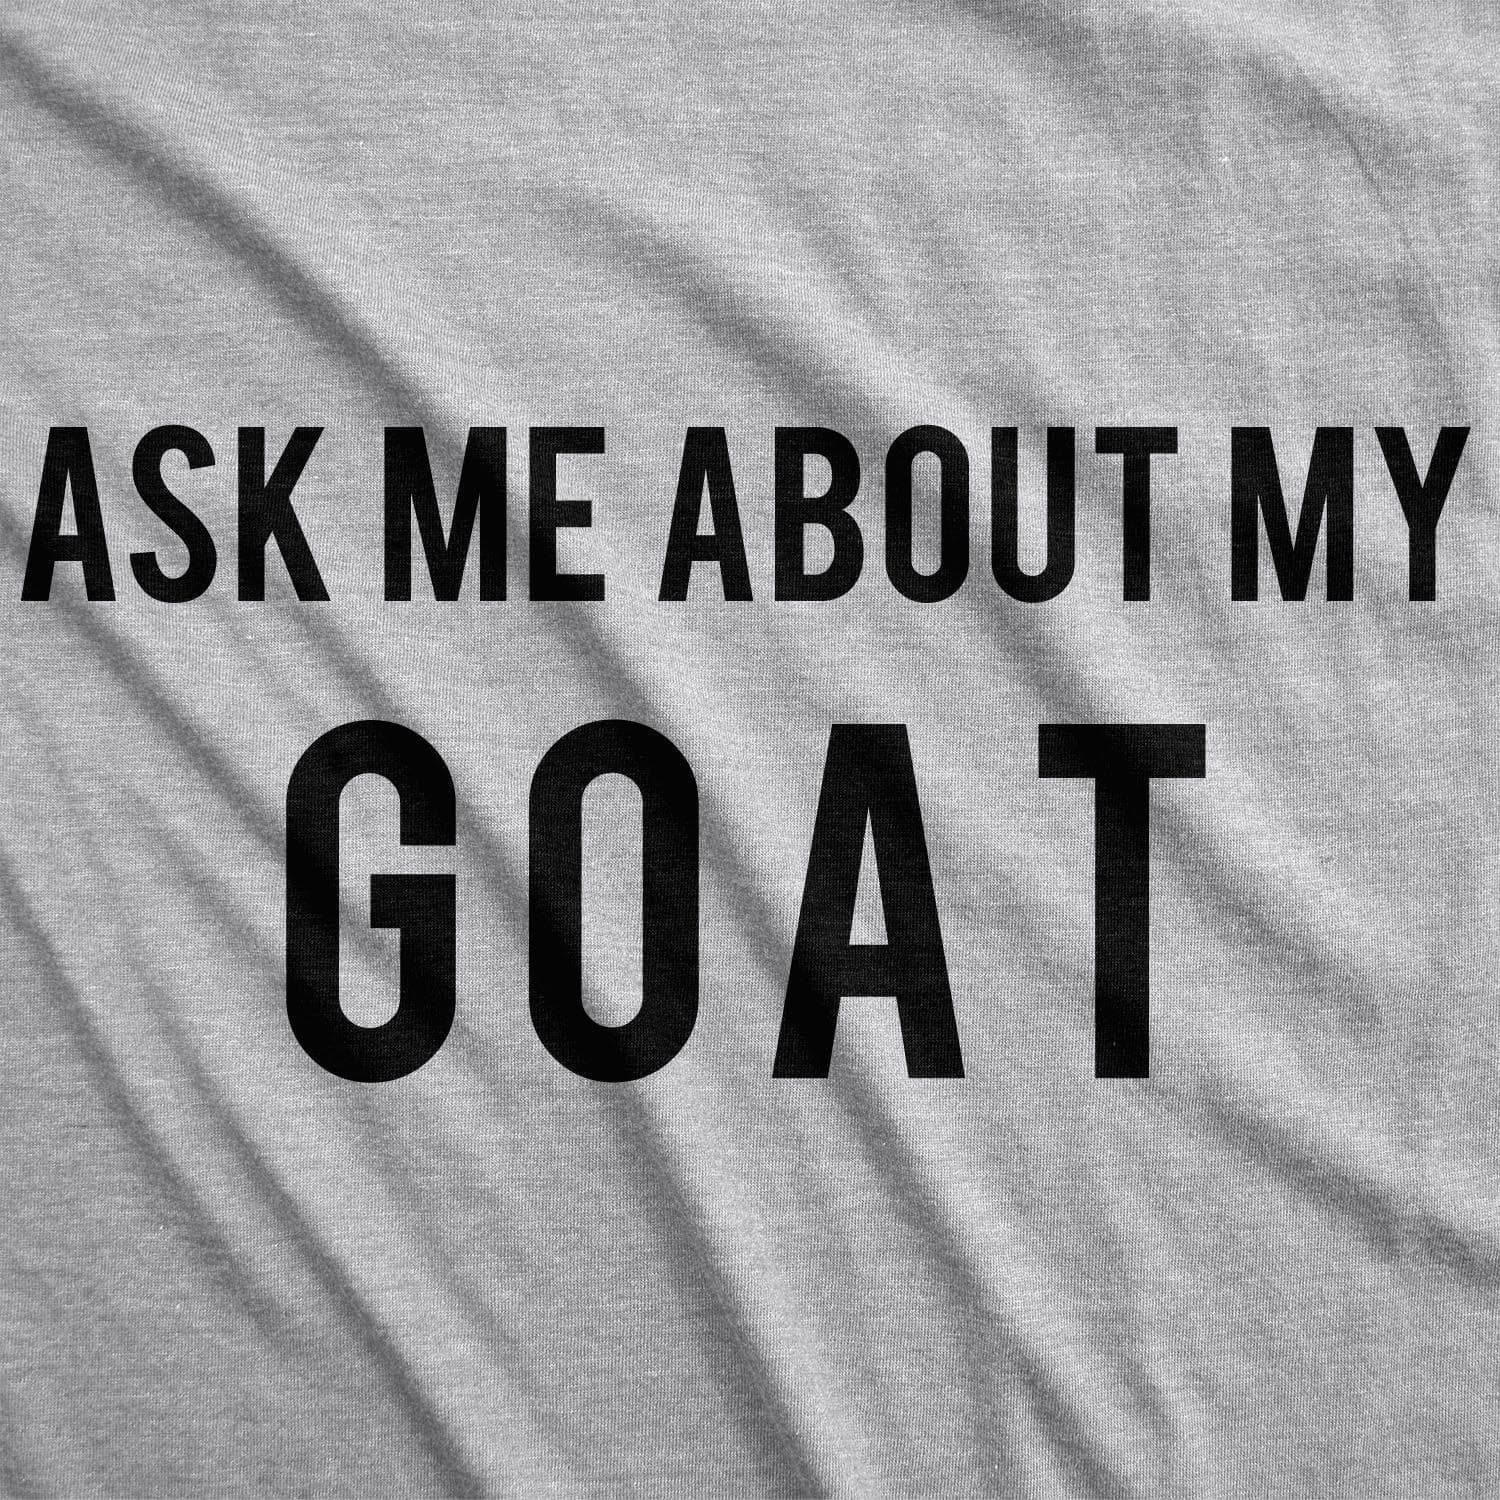 Ask Me About My Goat Flip Toddler Tshirt - Crazy Dog T-Shirts